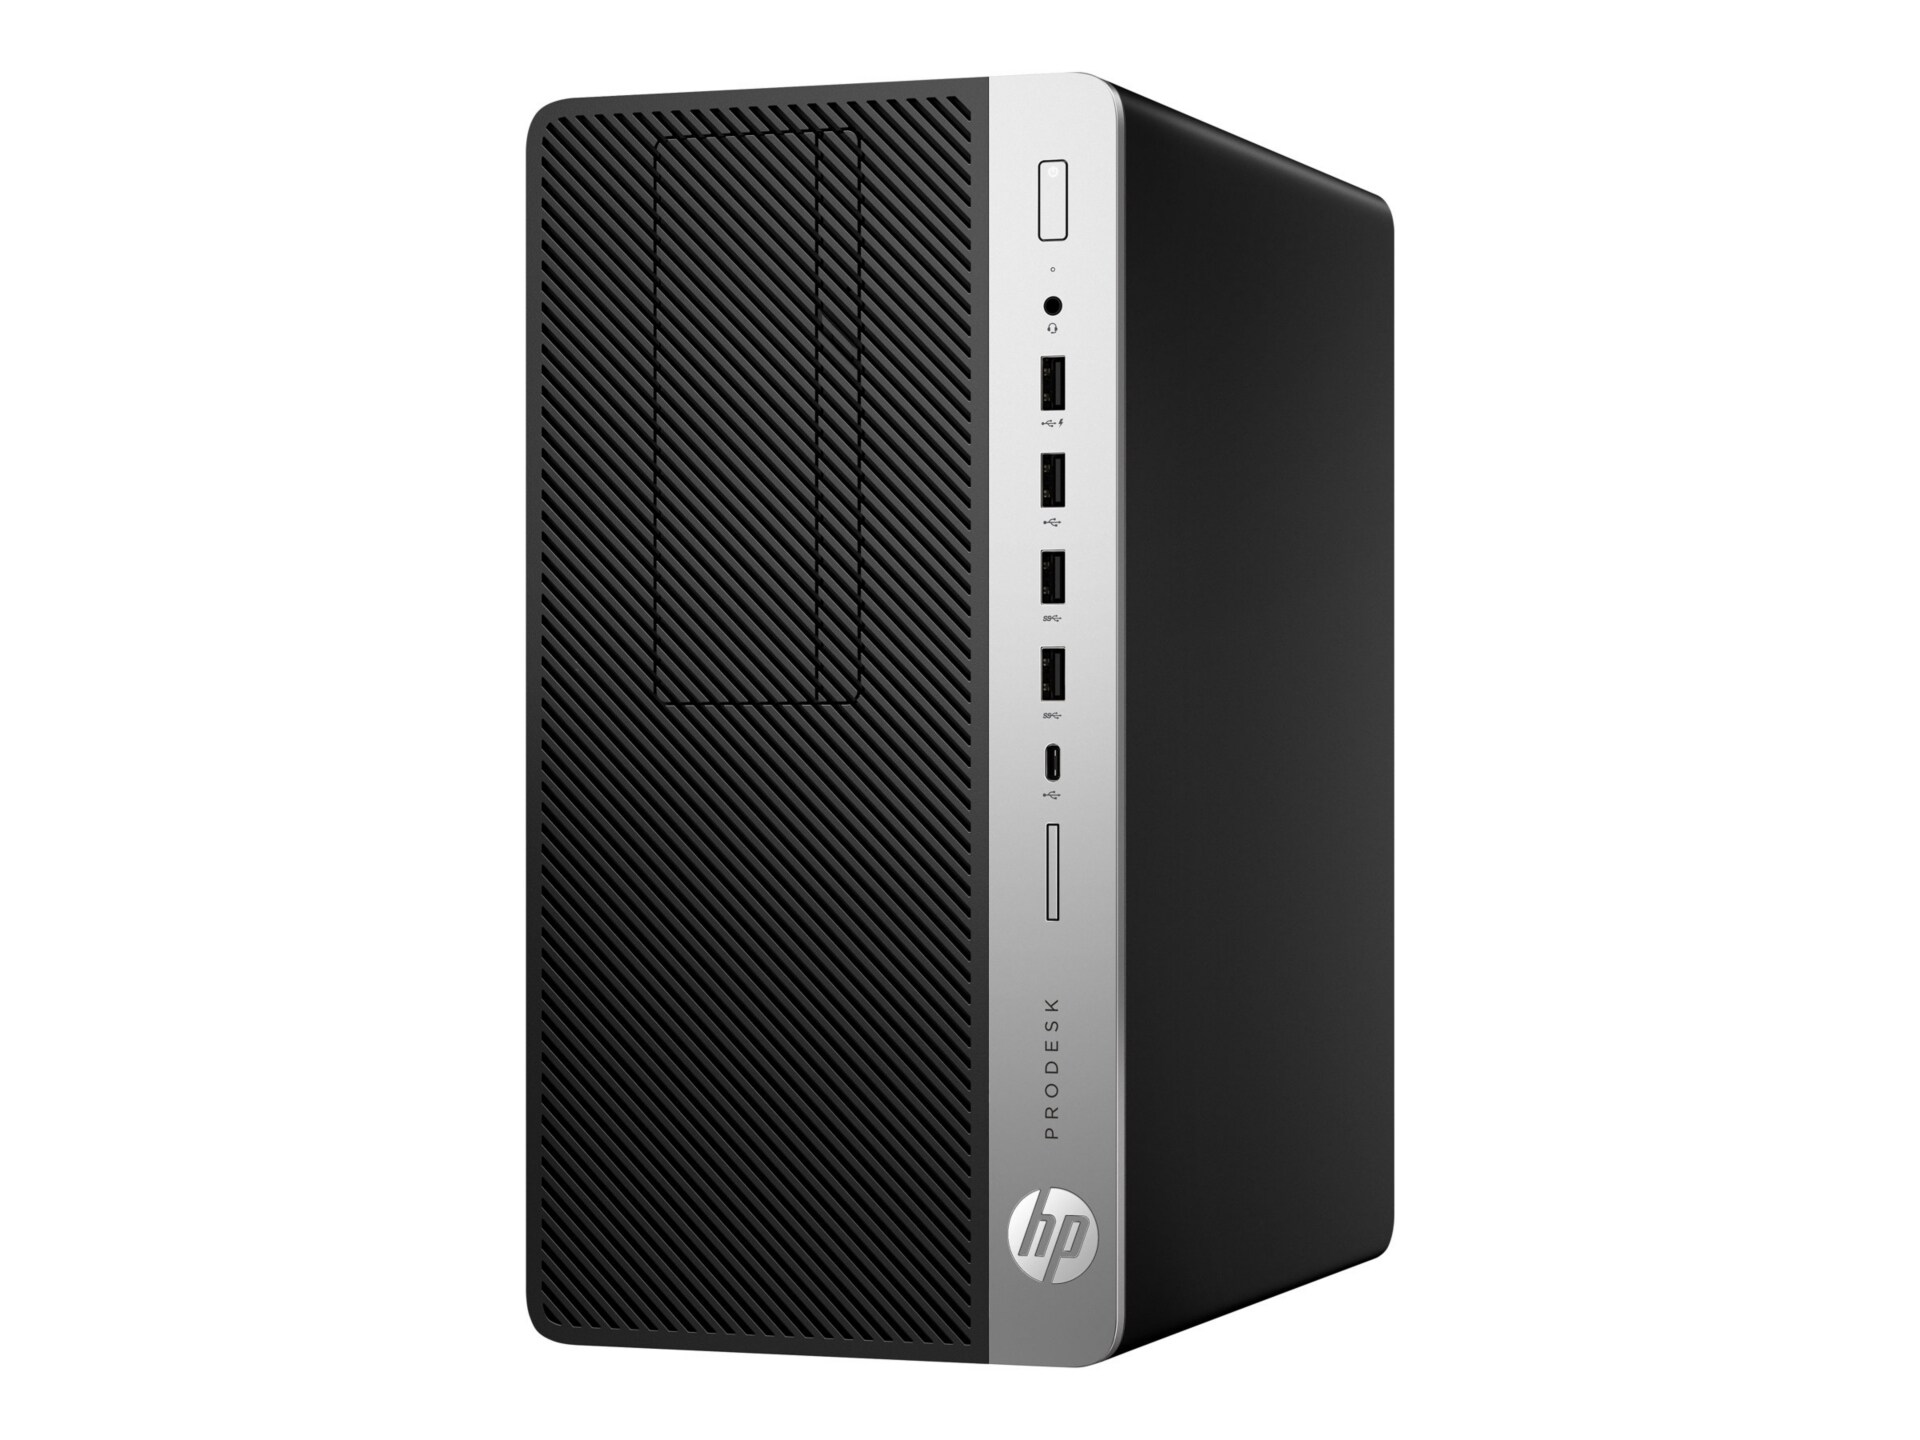 HP ProDesk 600 G3 - micro tower - Core i5 6500 3.2 GHz - 8 GB - 500 GB